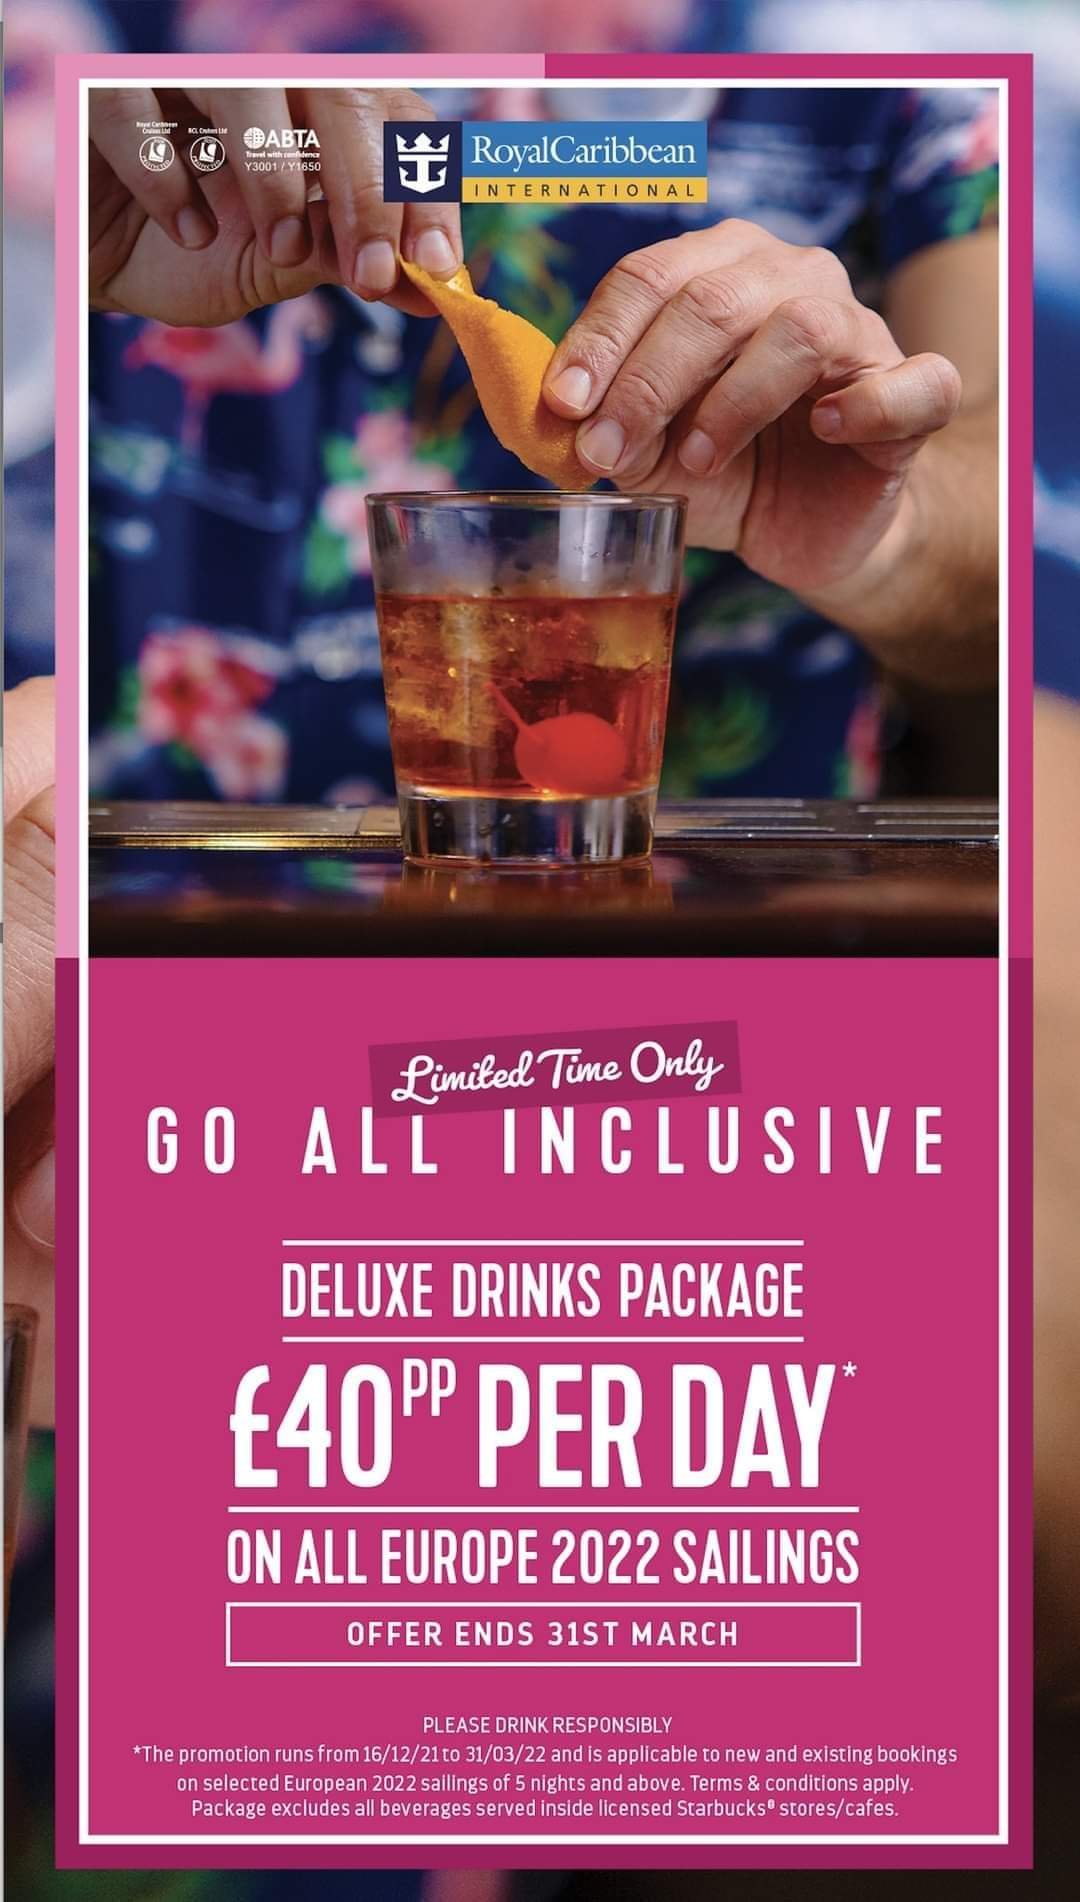 Deluxe Drinks Package On European Sailings - £40 pppd - Royal Caribbean  Discussion - Royal Caribbean Blog